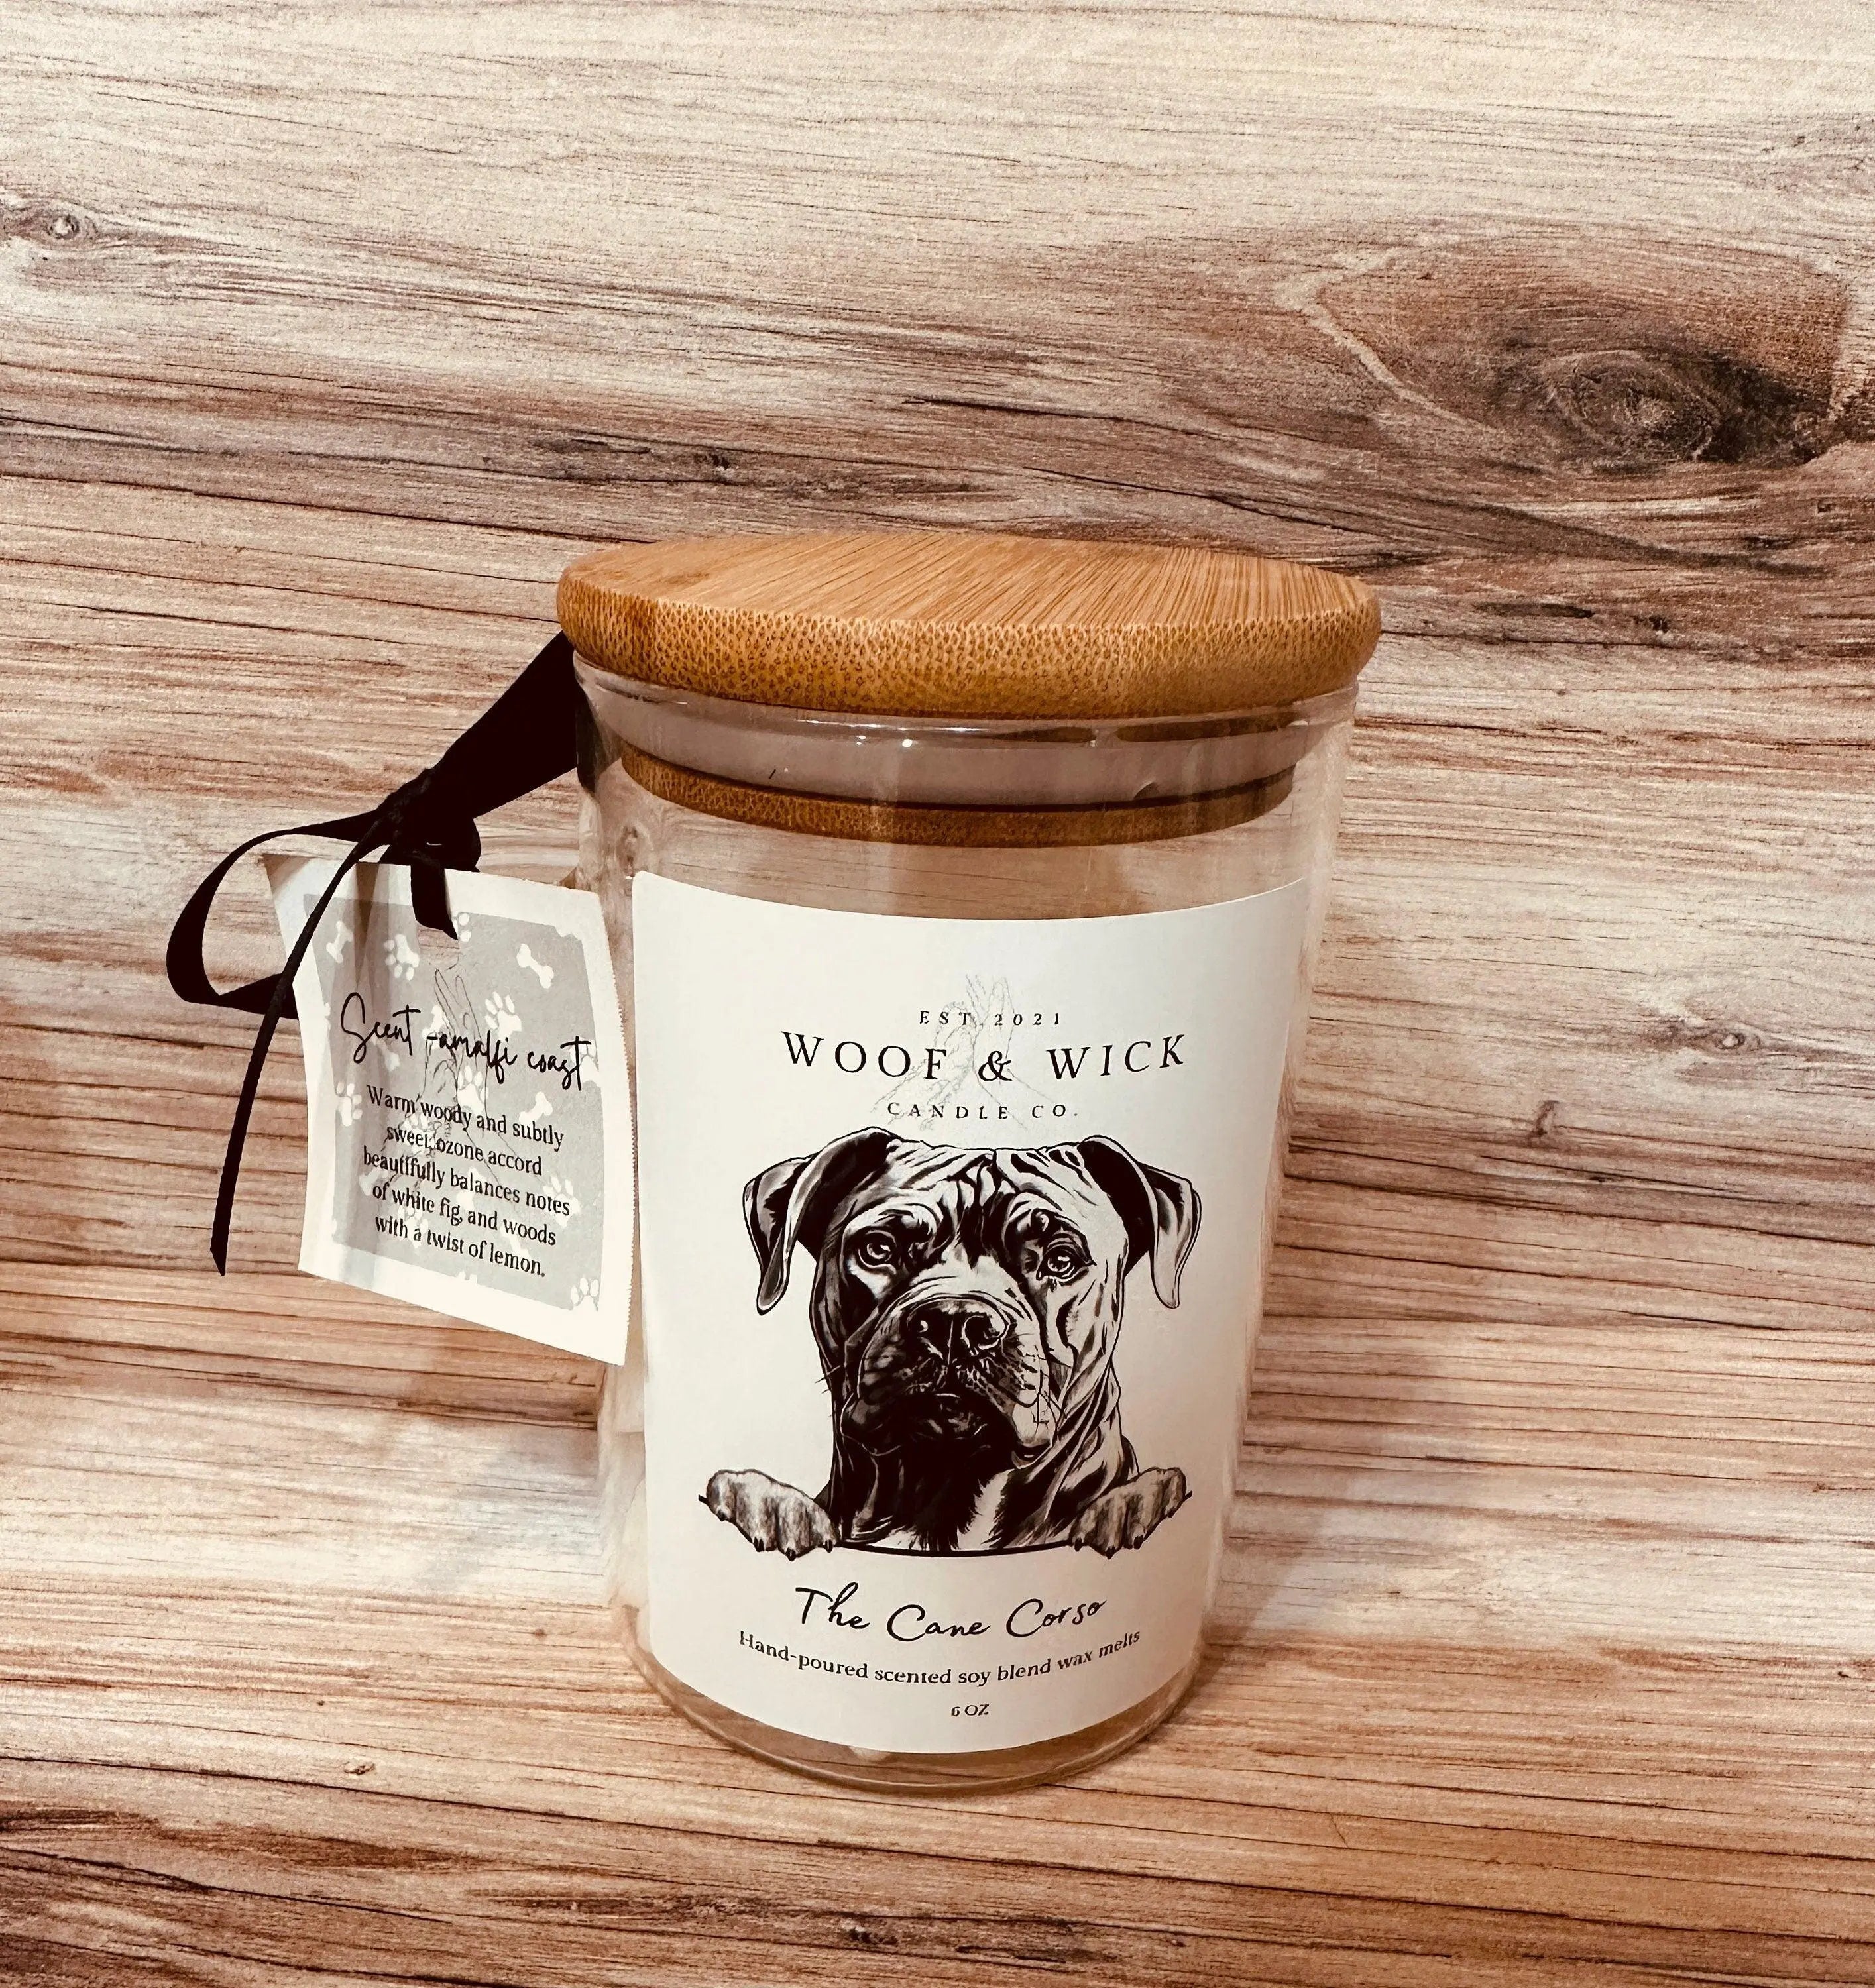 The Cane Corso - STRONG SCENTED Personalized Dog Breed Soy Wax Melts | Gift Ideas | Spring Scents | Wax Tarts | spring | - Woof & Wick Candle Co.